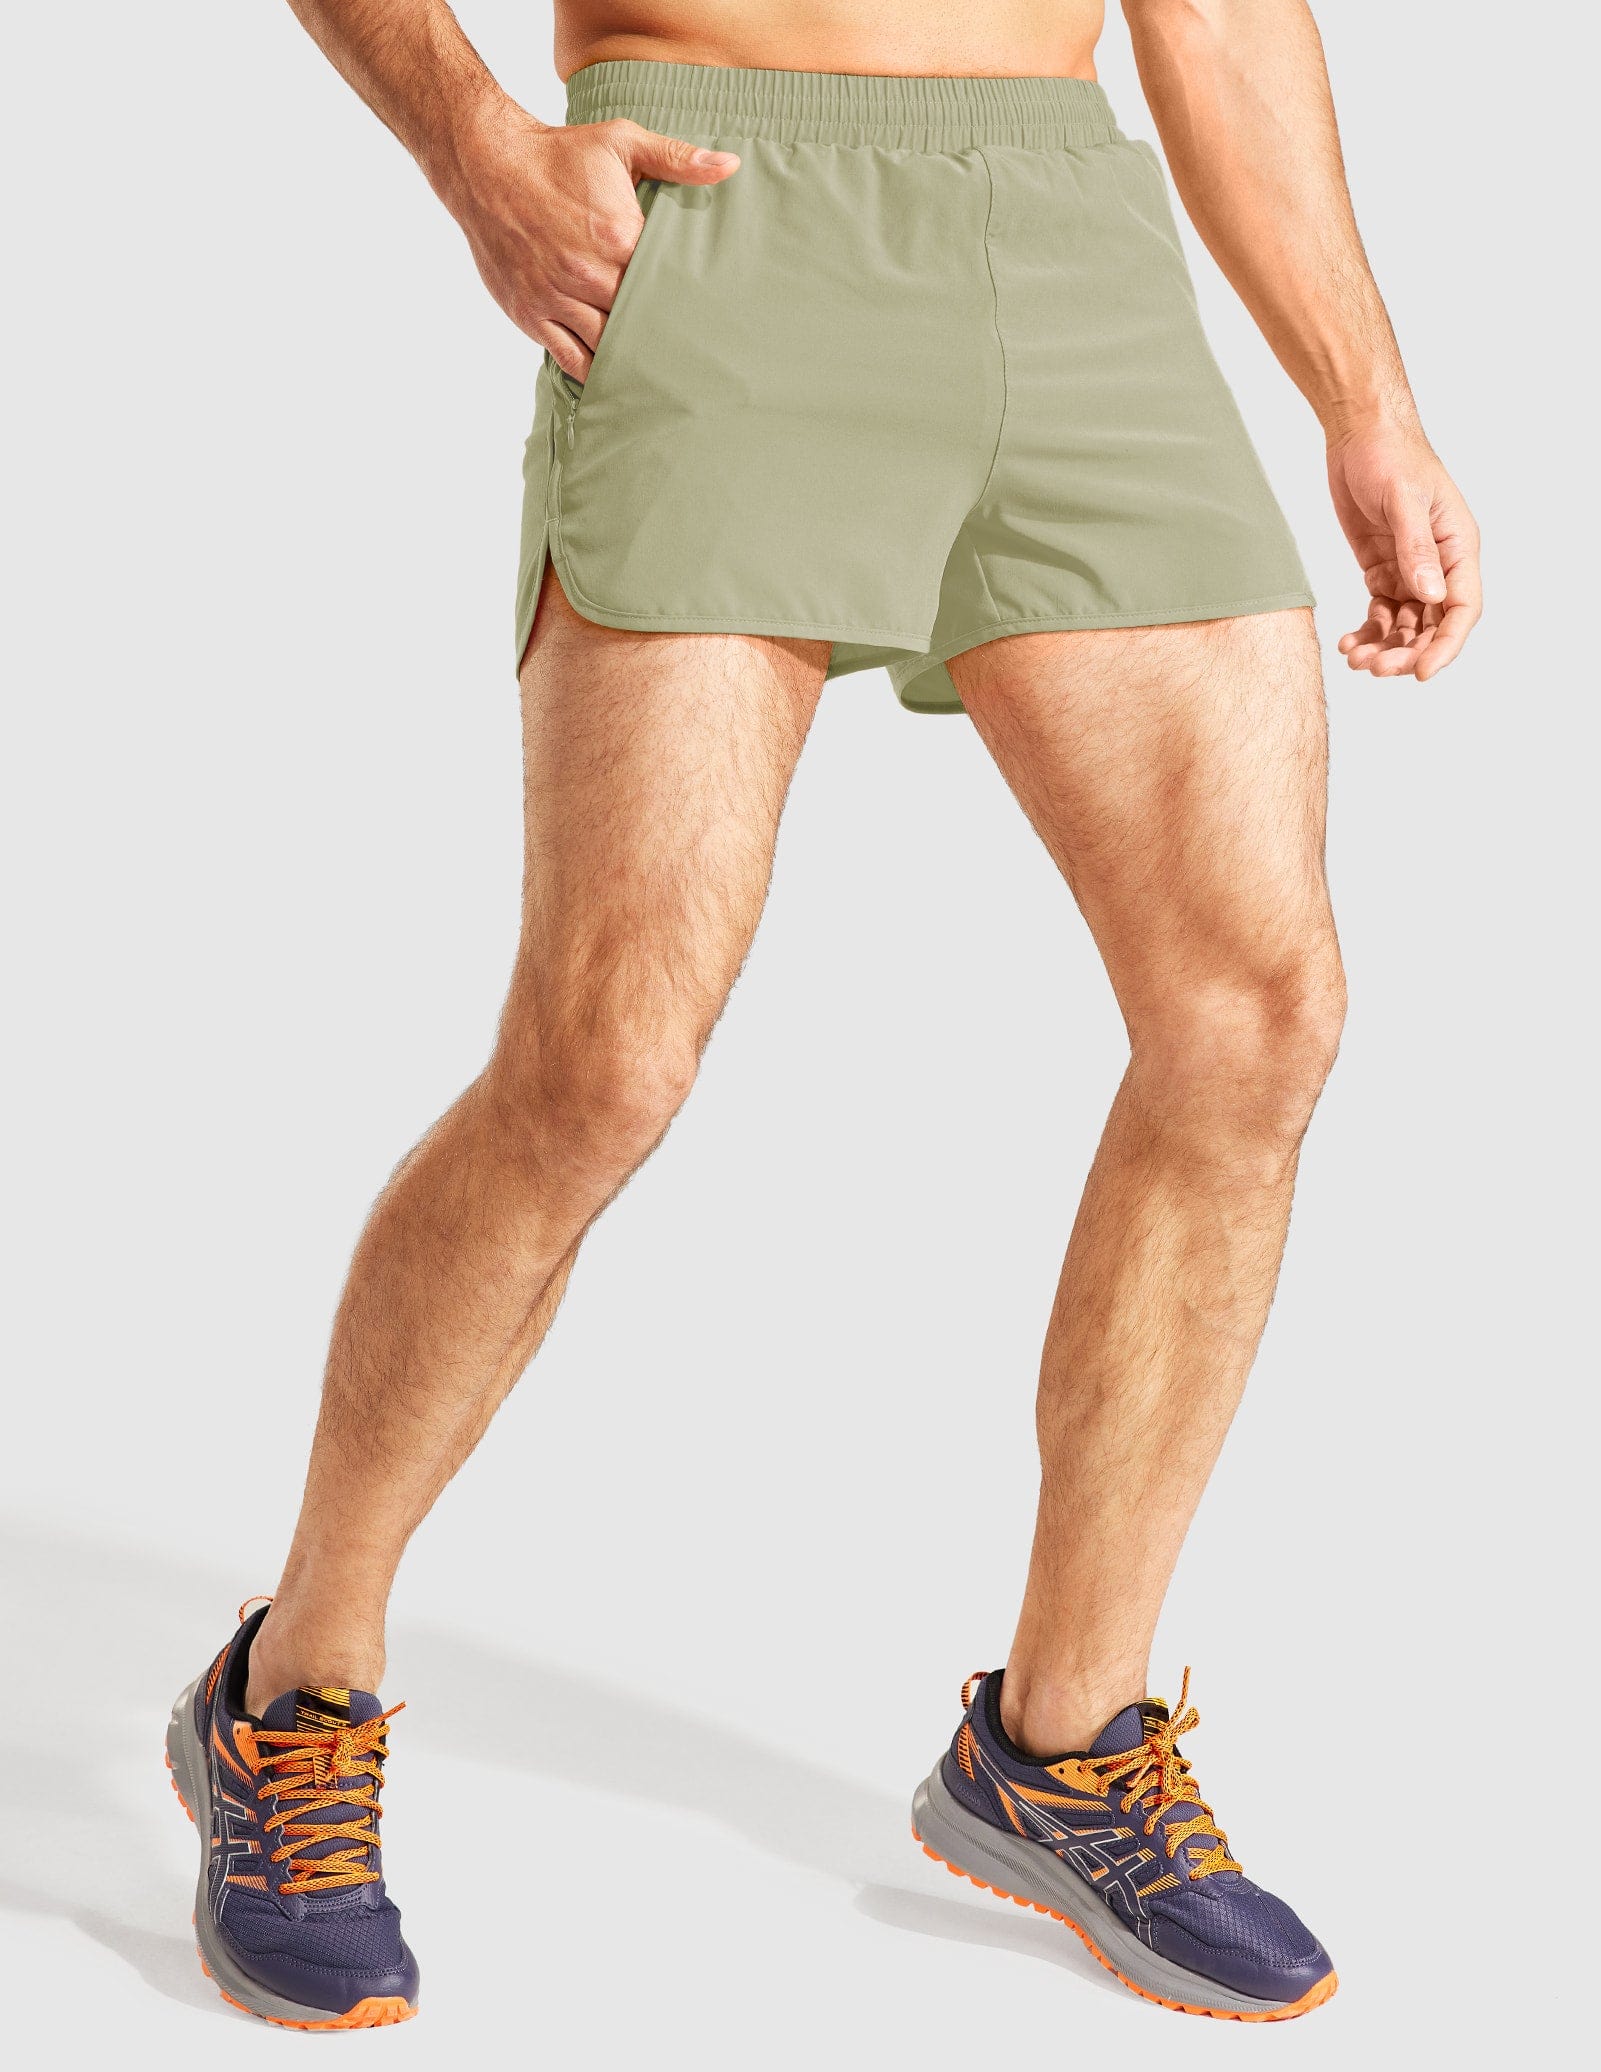 Men's 3 Inches Quick Dry Running Shorts with Liner Zip Pockets Men's Shorts Light Green / S MIER